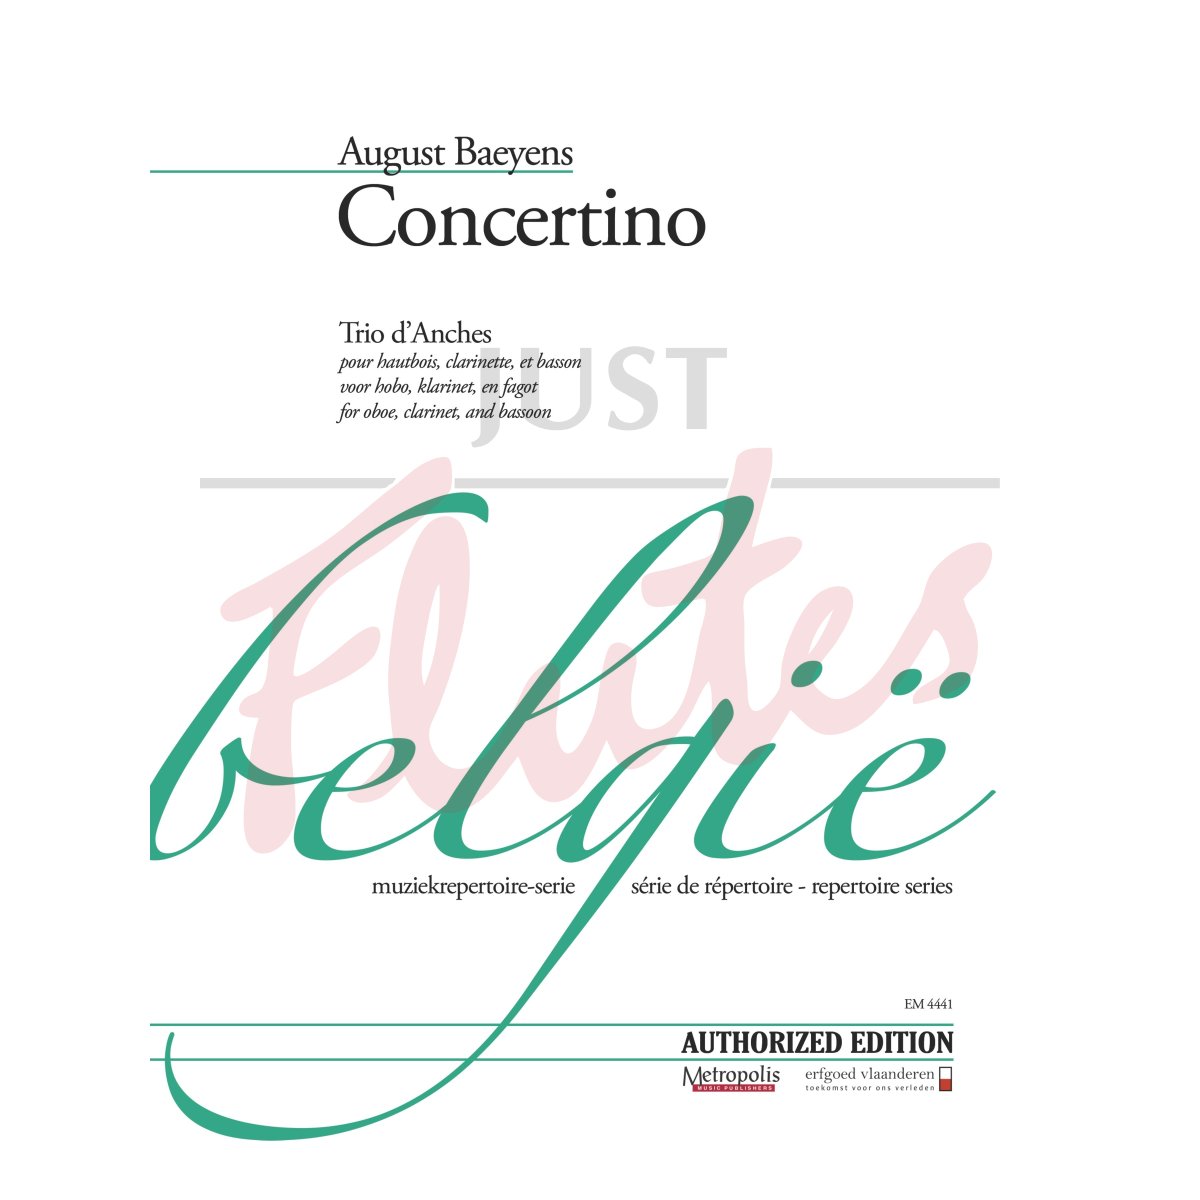 Concertino for Oboe, Clarinet and Bassoon